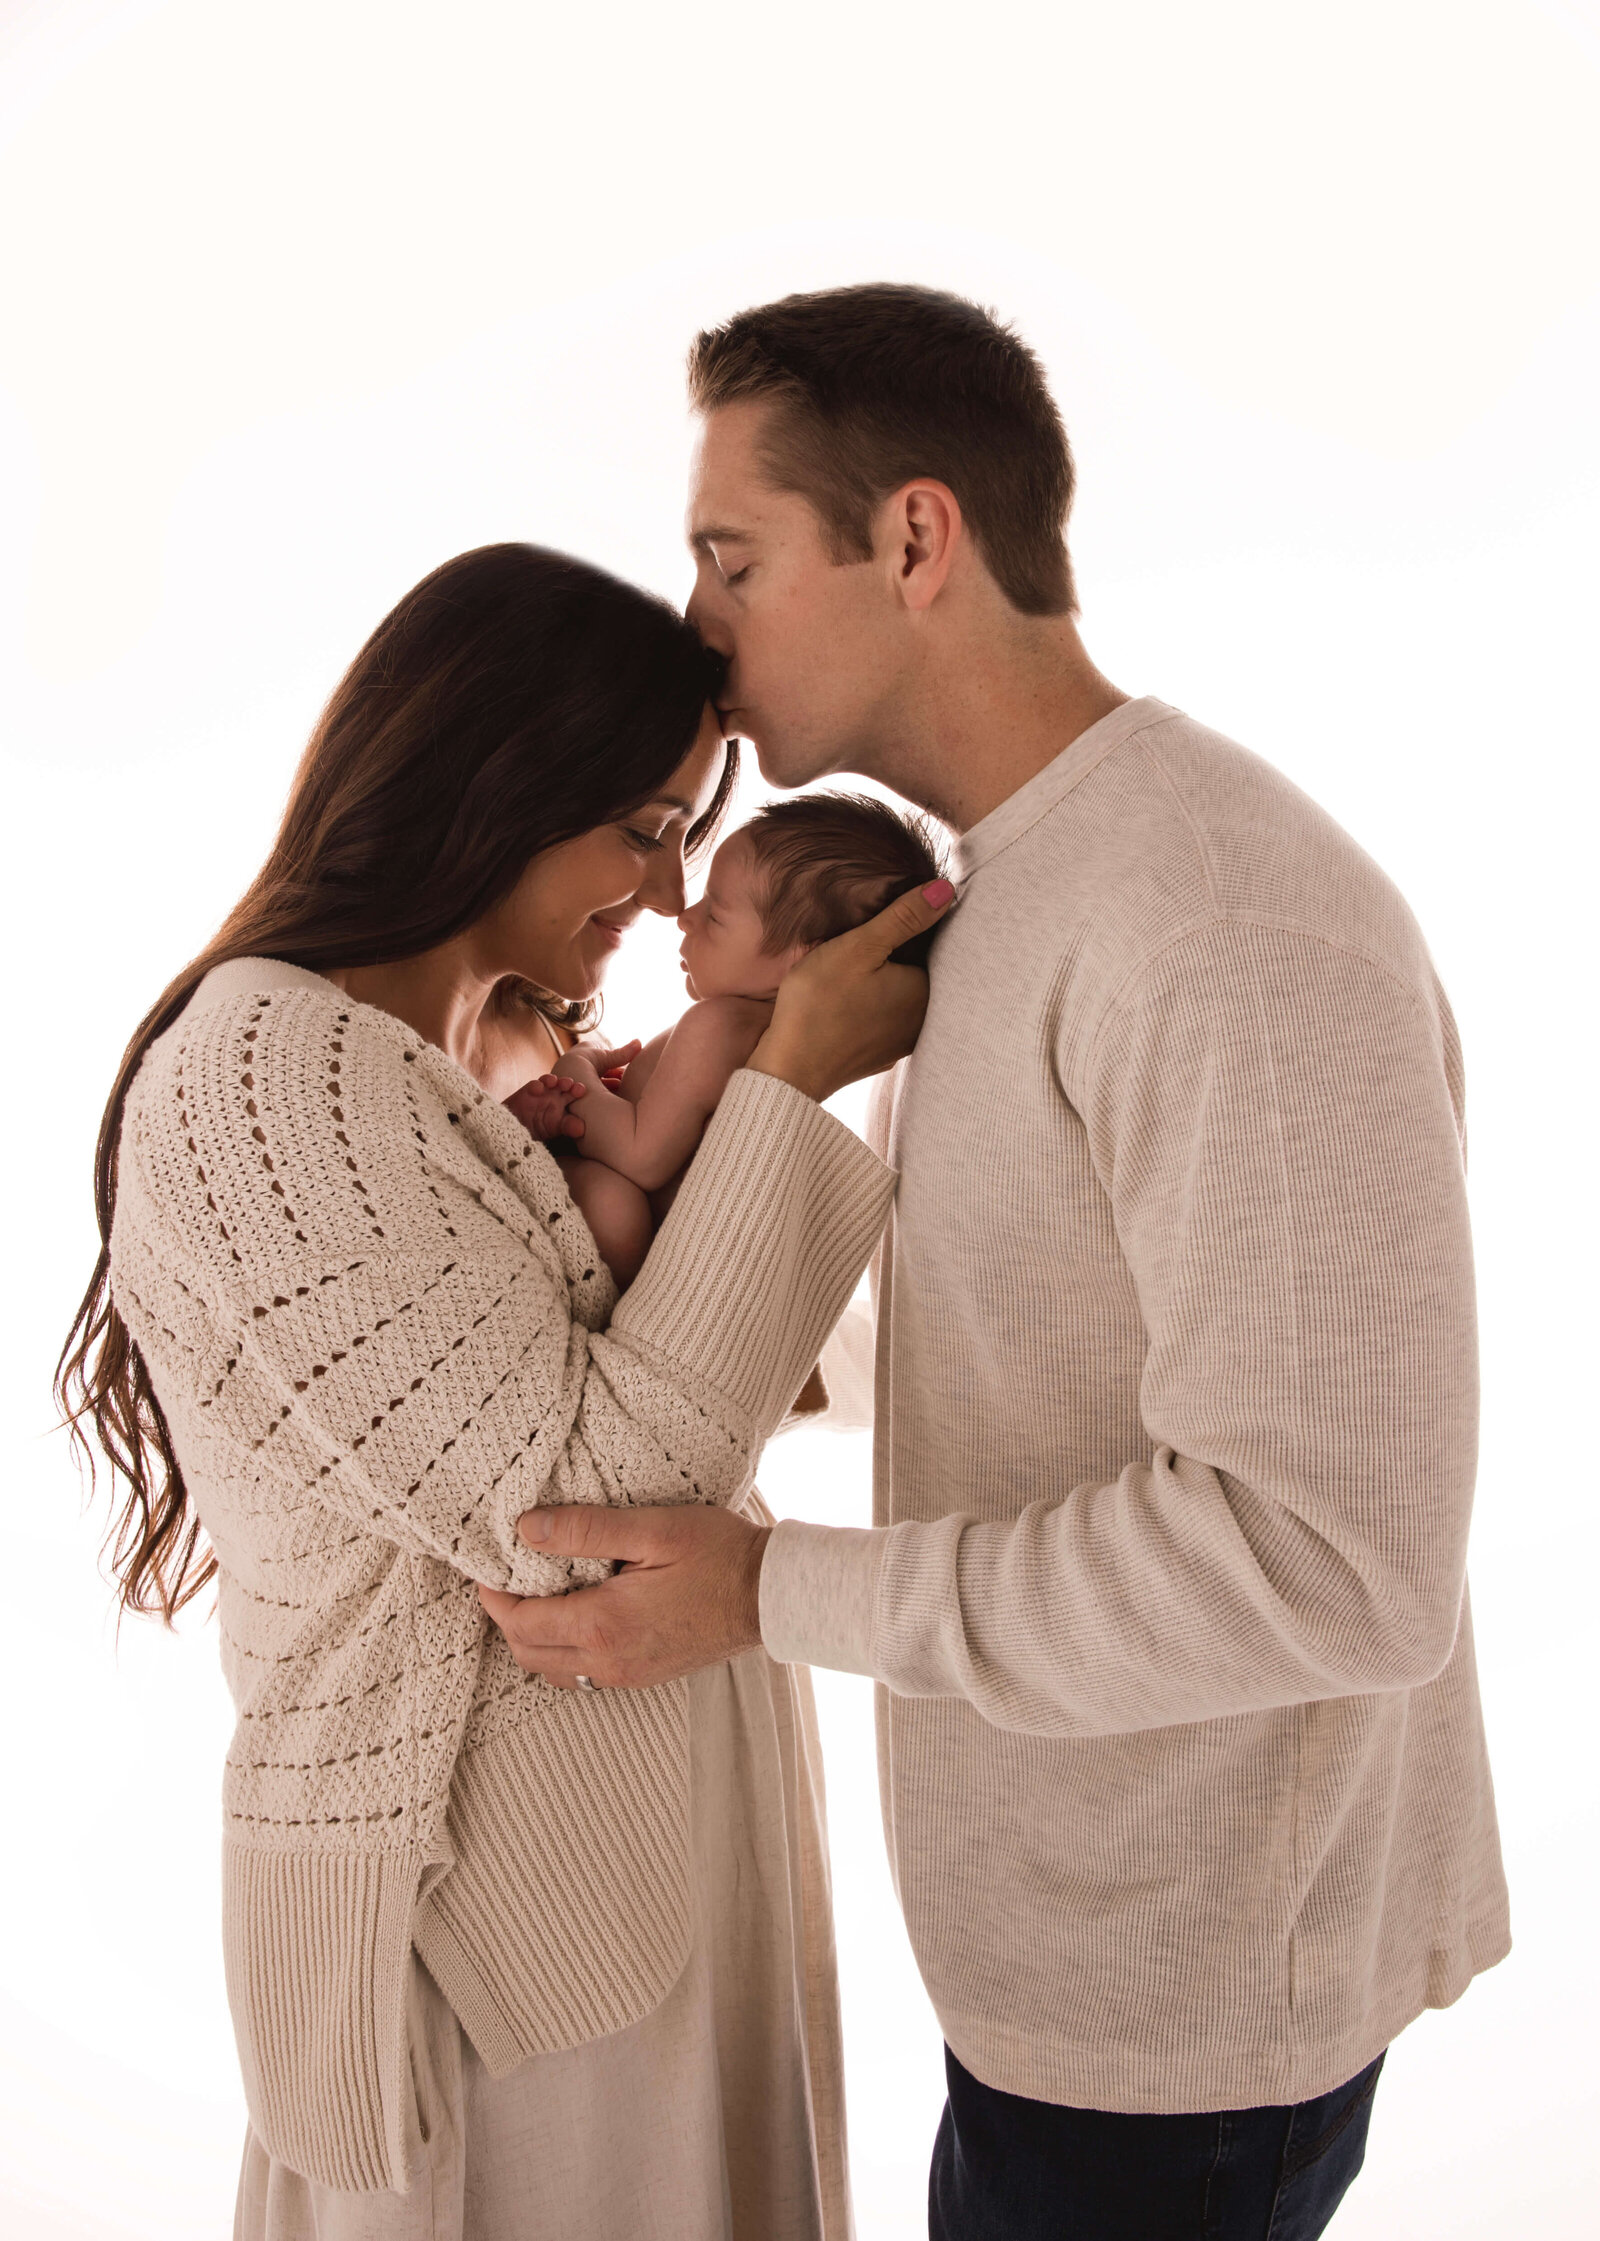 Couple embraced while holding baby. Husband kissing wifes forehead in studio by Ashley Nicole.